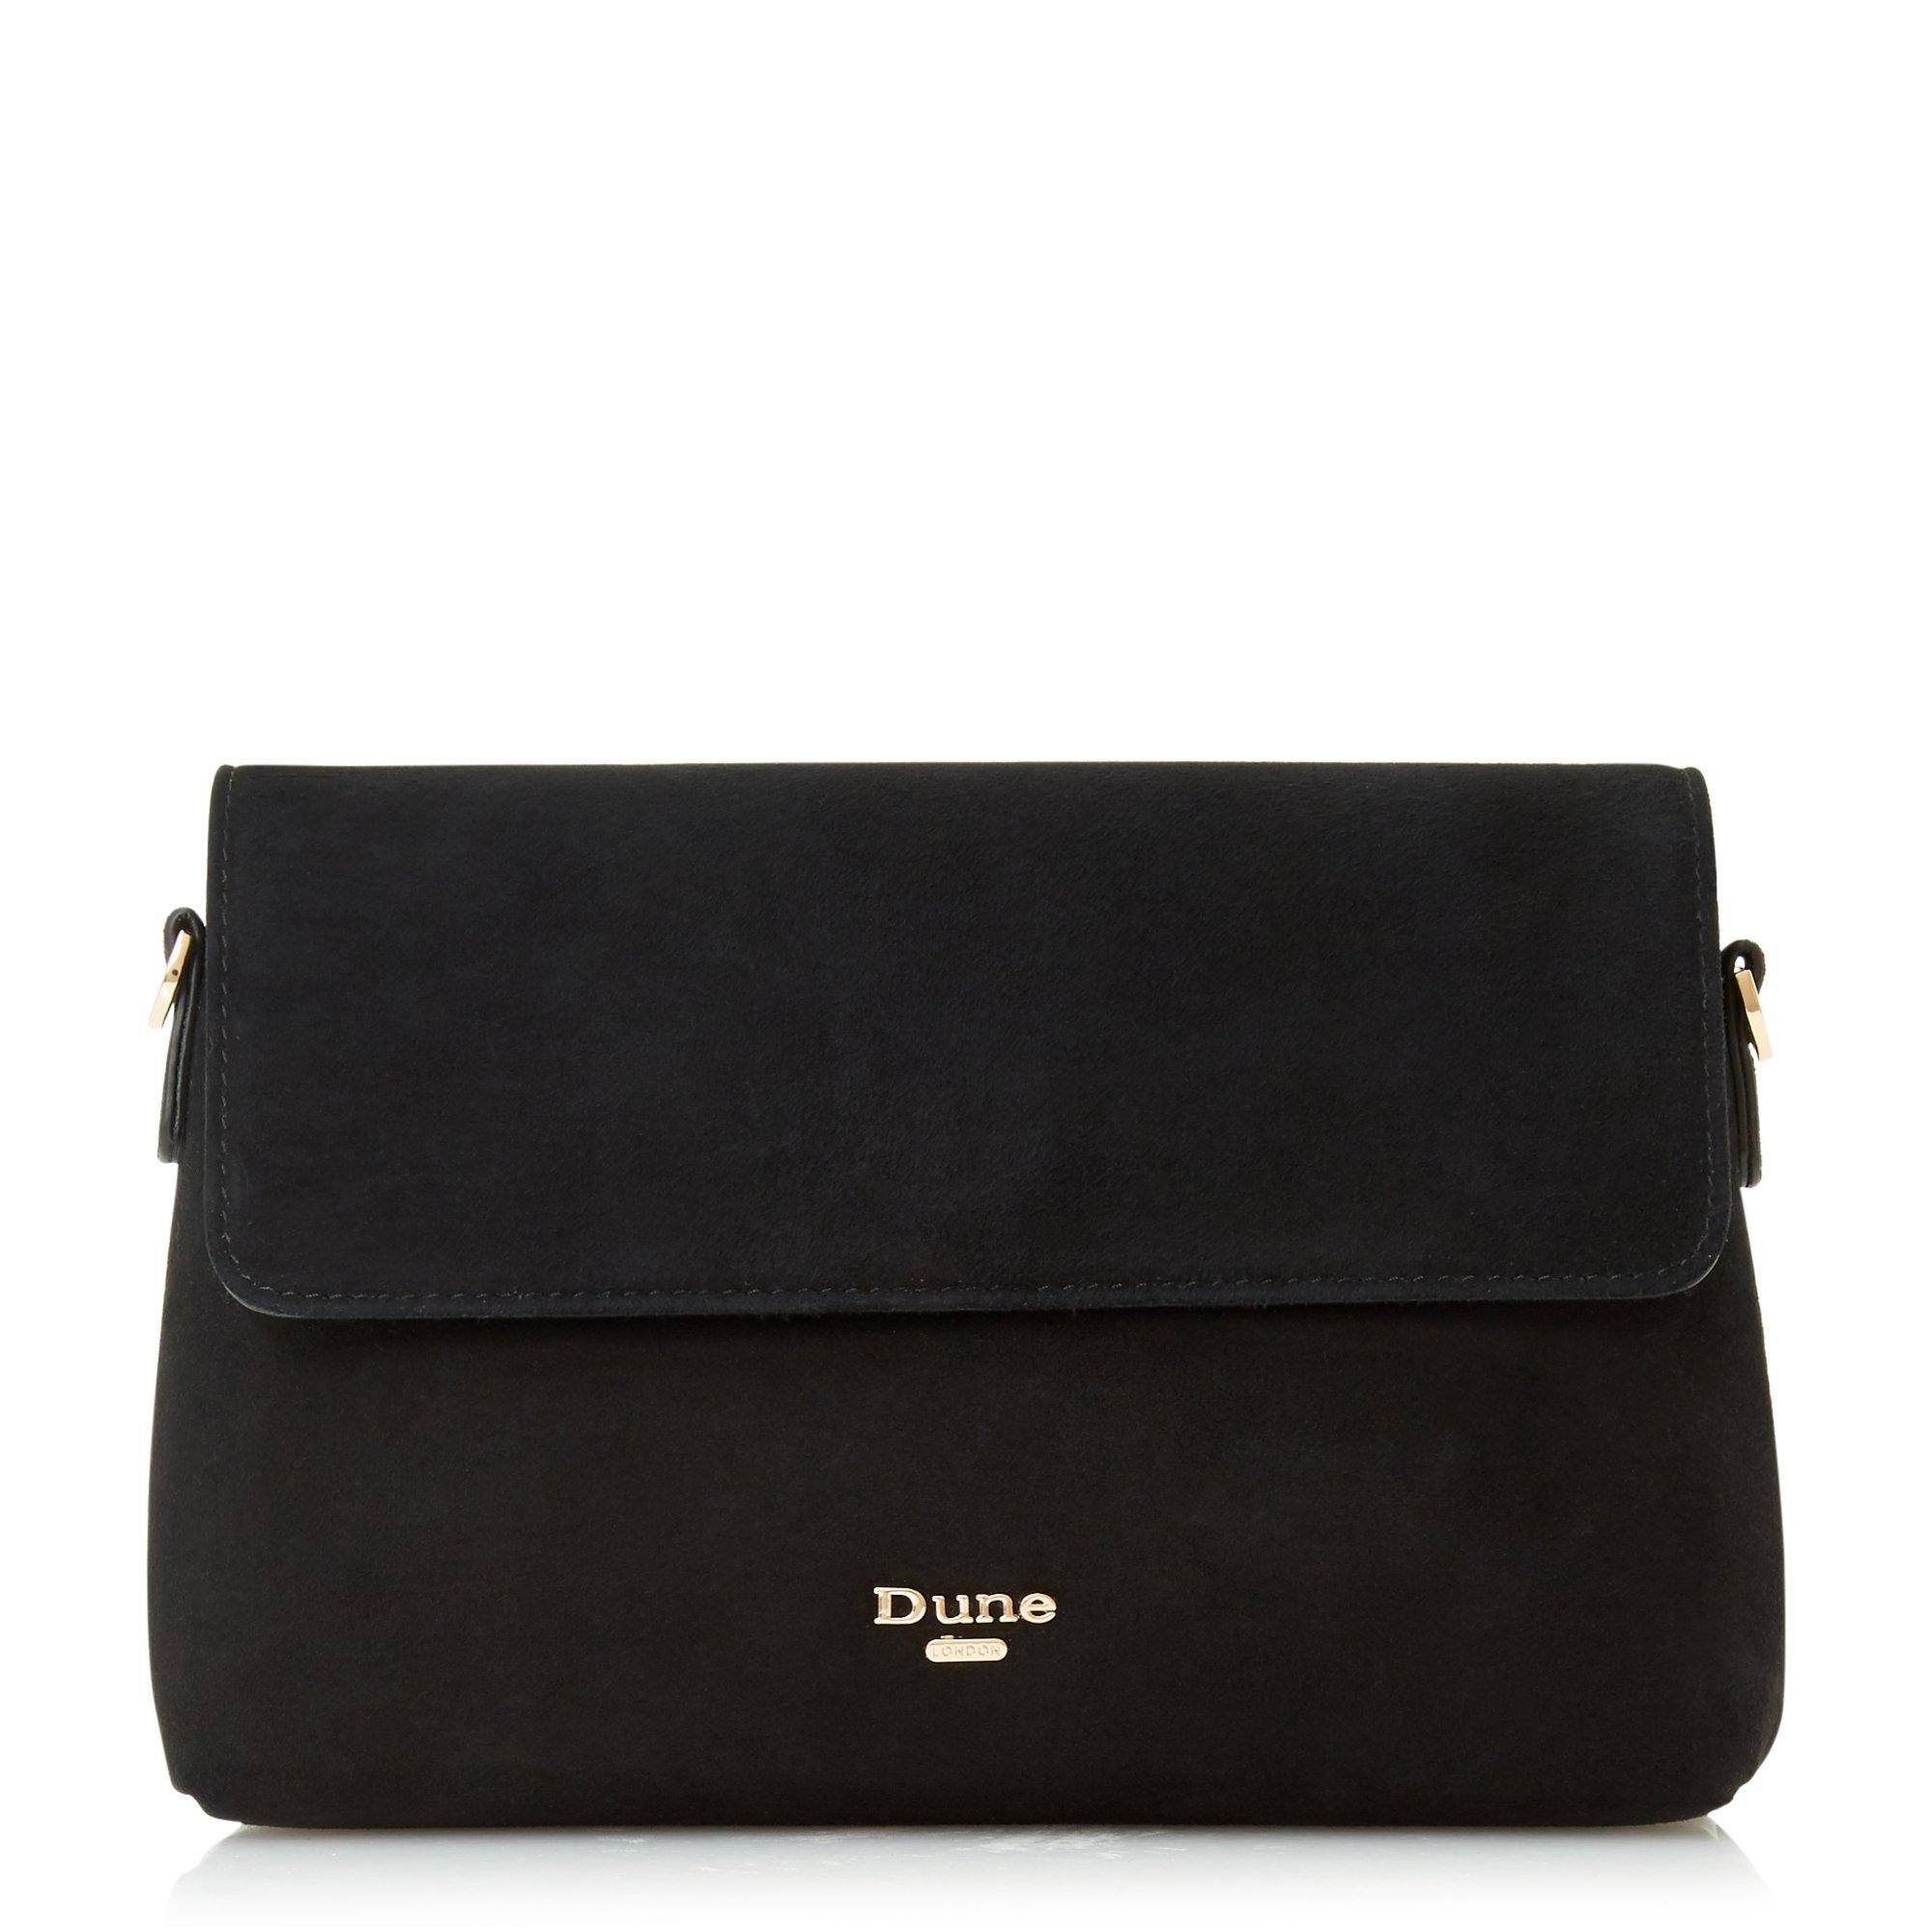 Add a stylish finishing touch to your accessories line-up with this clutch. Simple yet chic, its minimalist design is offset with a metal chain strap. The spacious interior is ideal for carrying your day-to-evening essentials.